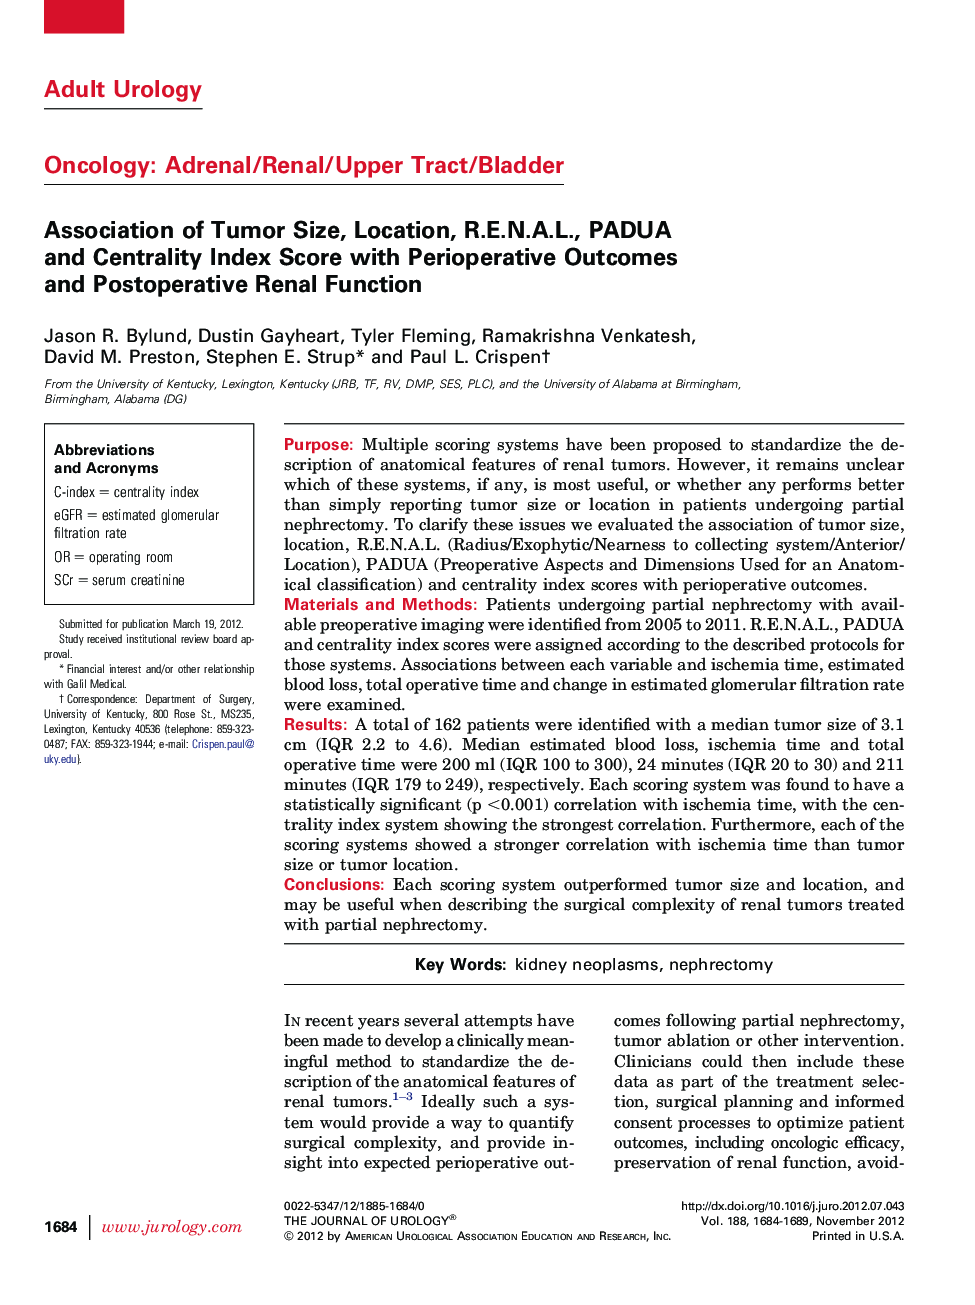 Association of Tumor Size, Location, R.E.N.A.L., PADUA and Centrality Index Score with Perioperative Outcomes and Postoperative Renal Function 